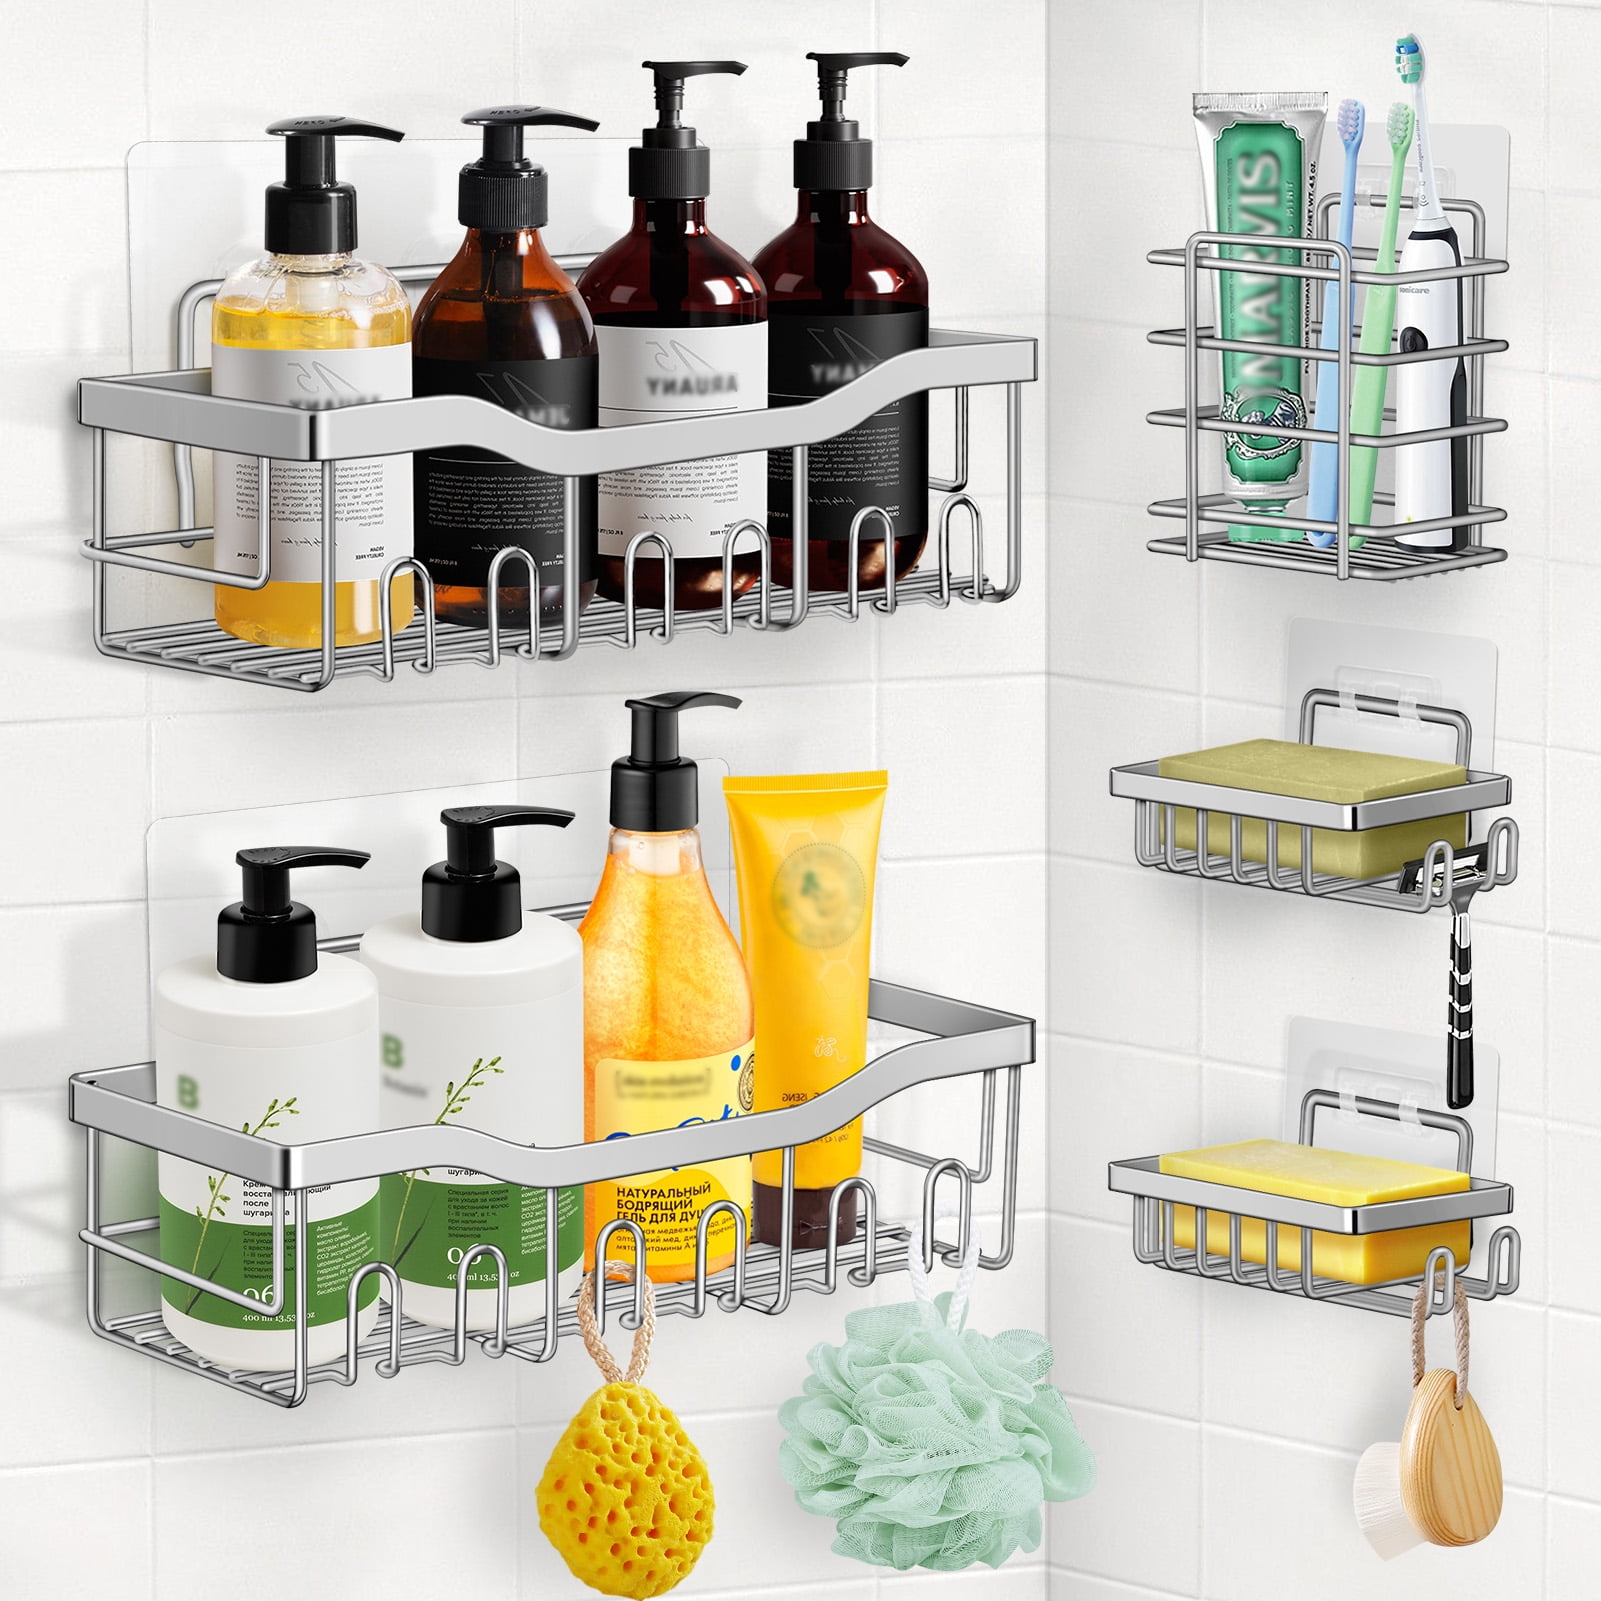 EUDELE Shower Caddy 5 Pack,Adhesive Shower Organizer for Bathroom  Storage&Home Decor&Kitchen,No Drilling,Large Capacity,Rustproof Stainless  Steel Bathroom Organizer,Shower Shelves for Inside Shower